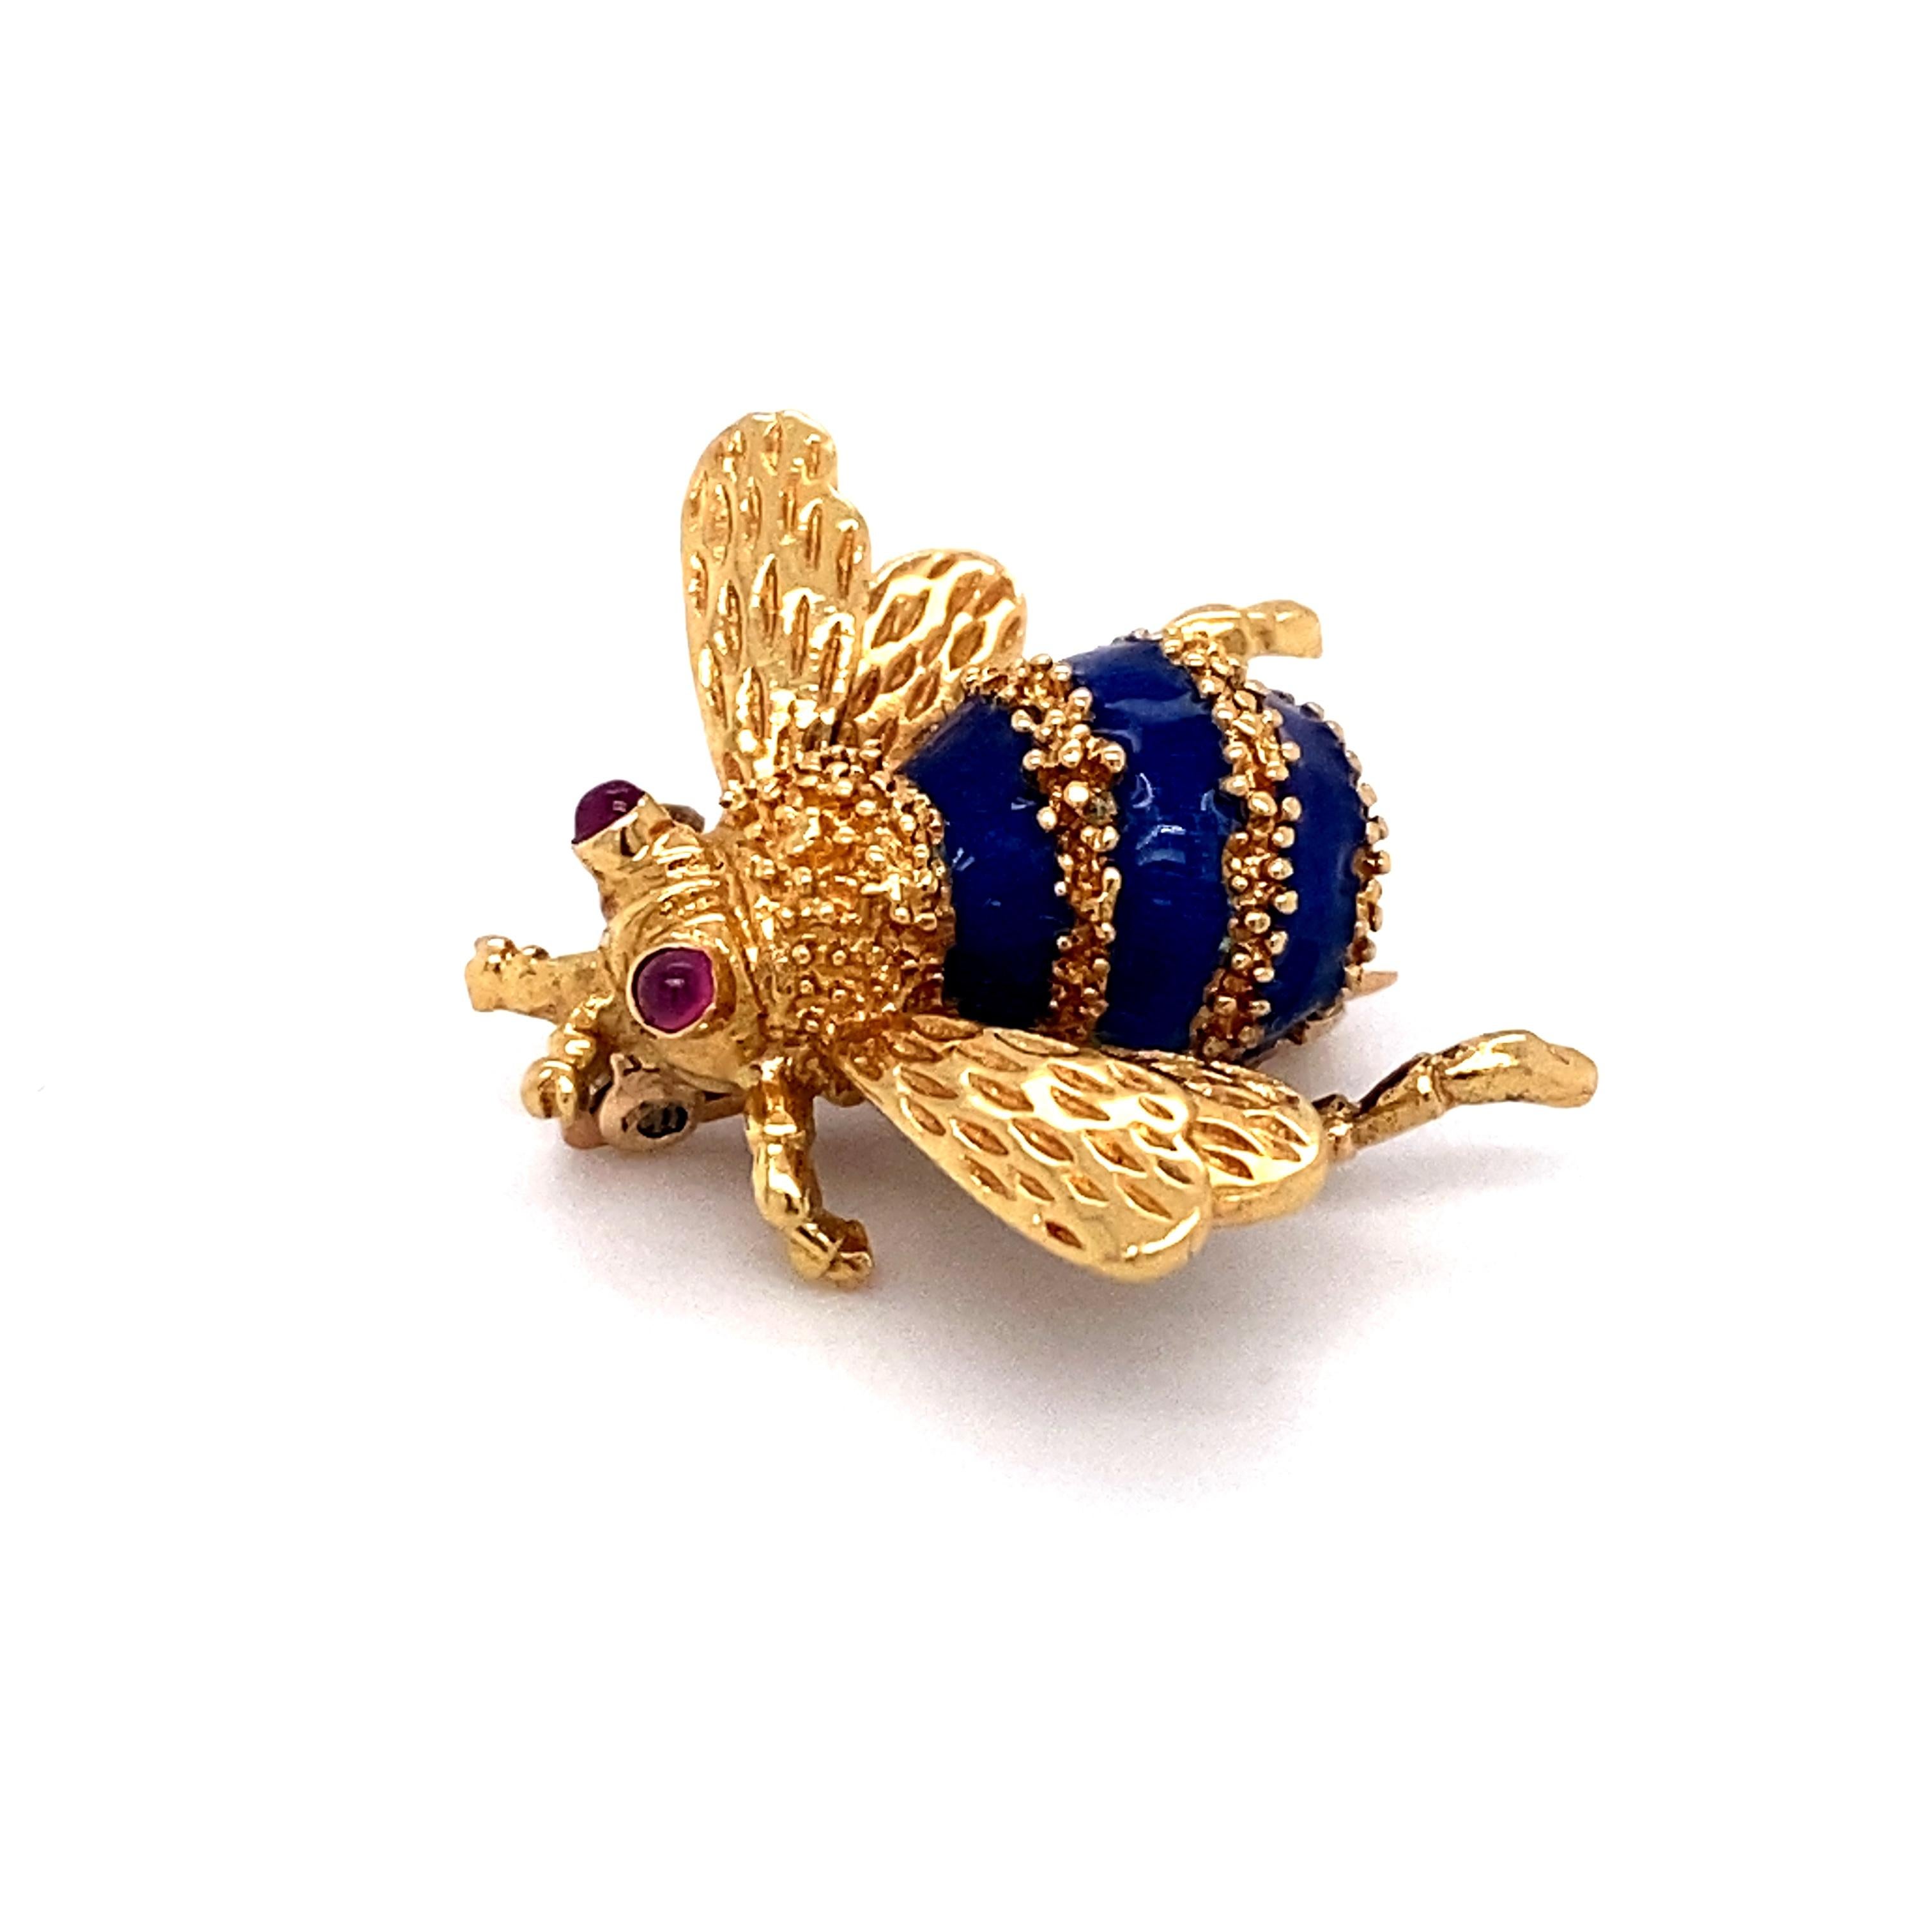 Enamel and Cabochon Ruby Bee Brooch in 18 Karat Gold In Excellent Condition For Sale In Atlanta, GA